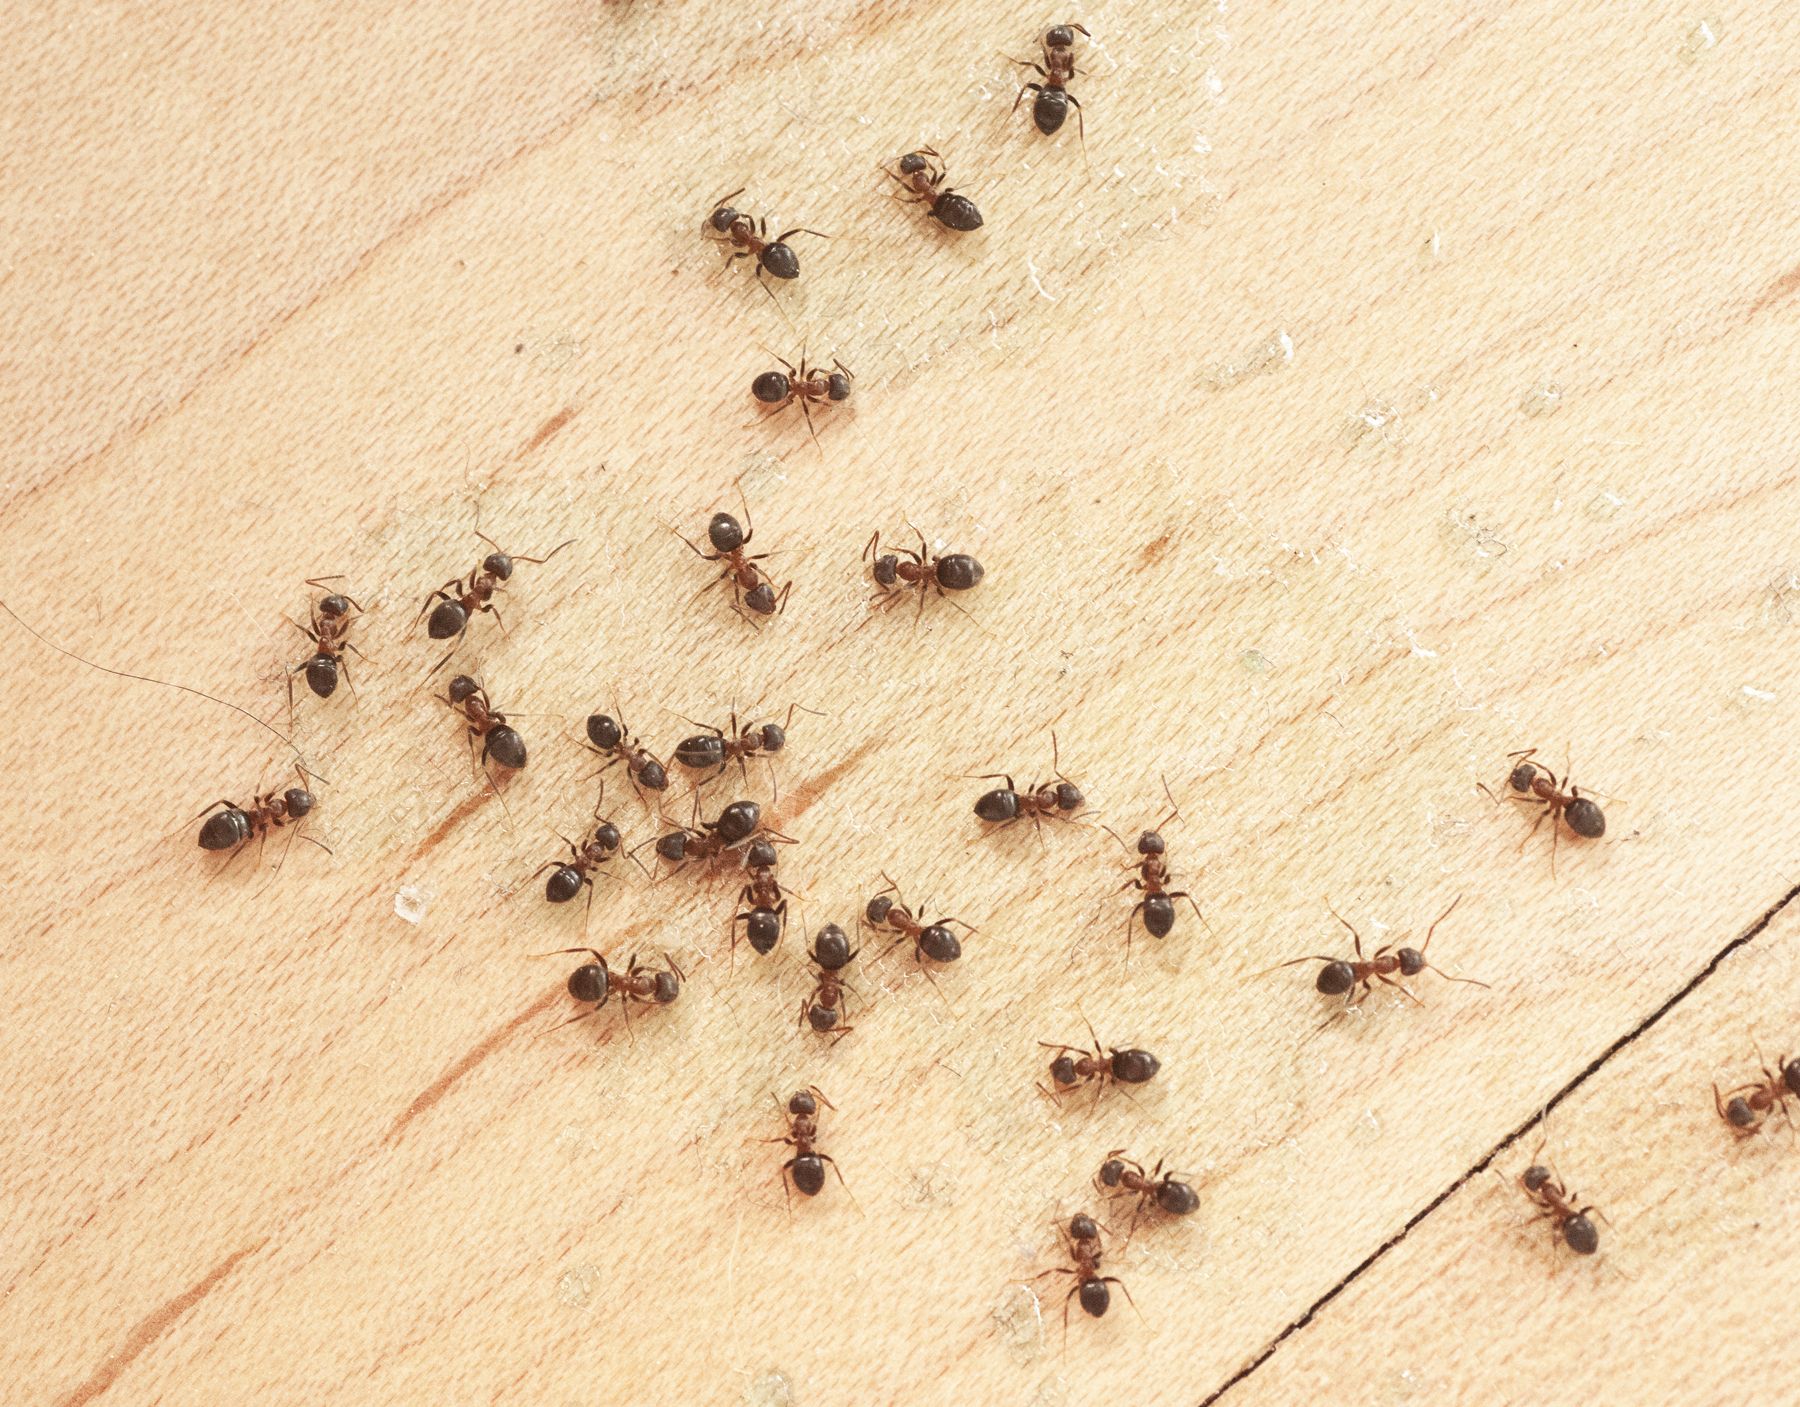 ants on wodden floor top view mit ameisengift royalty free image 1590572104